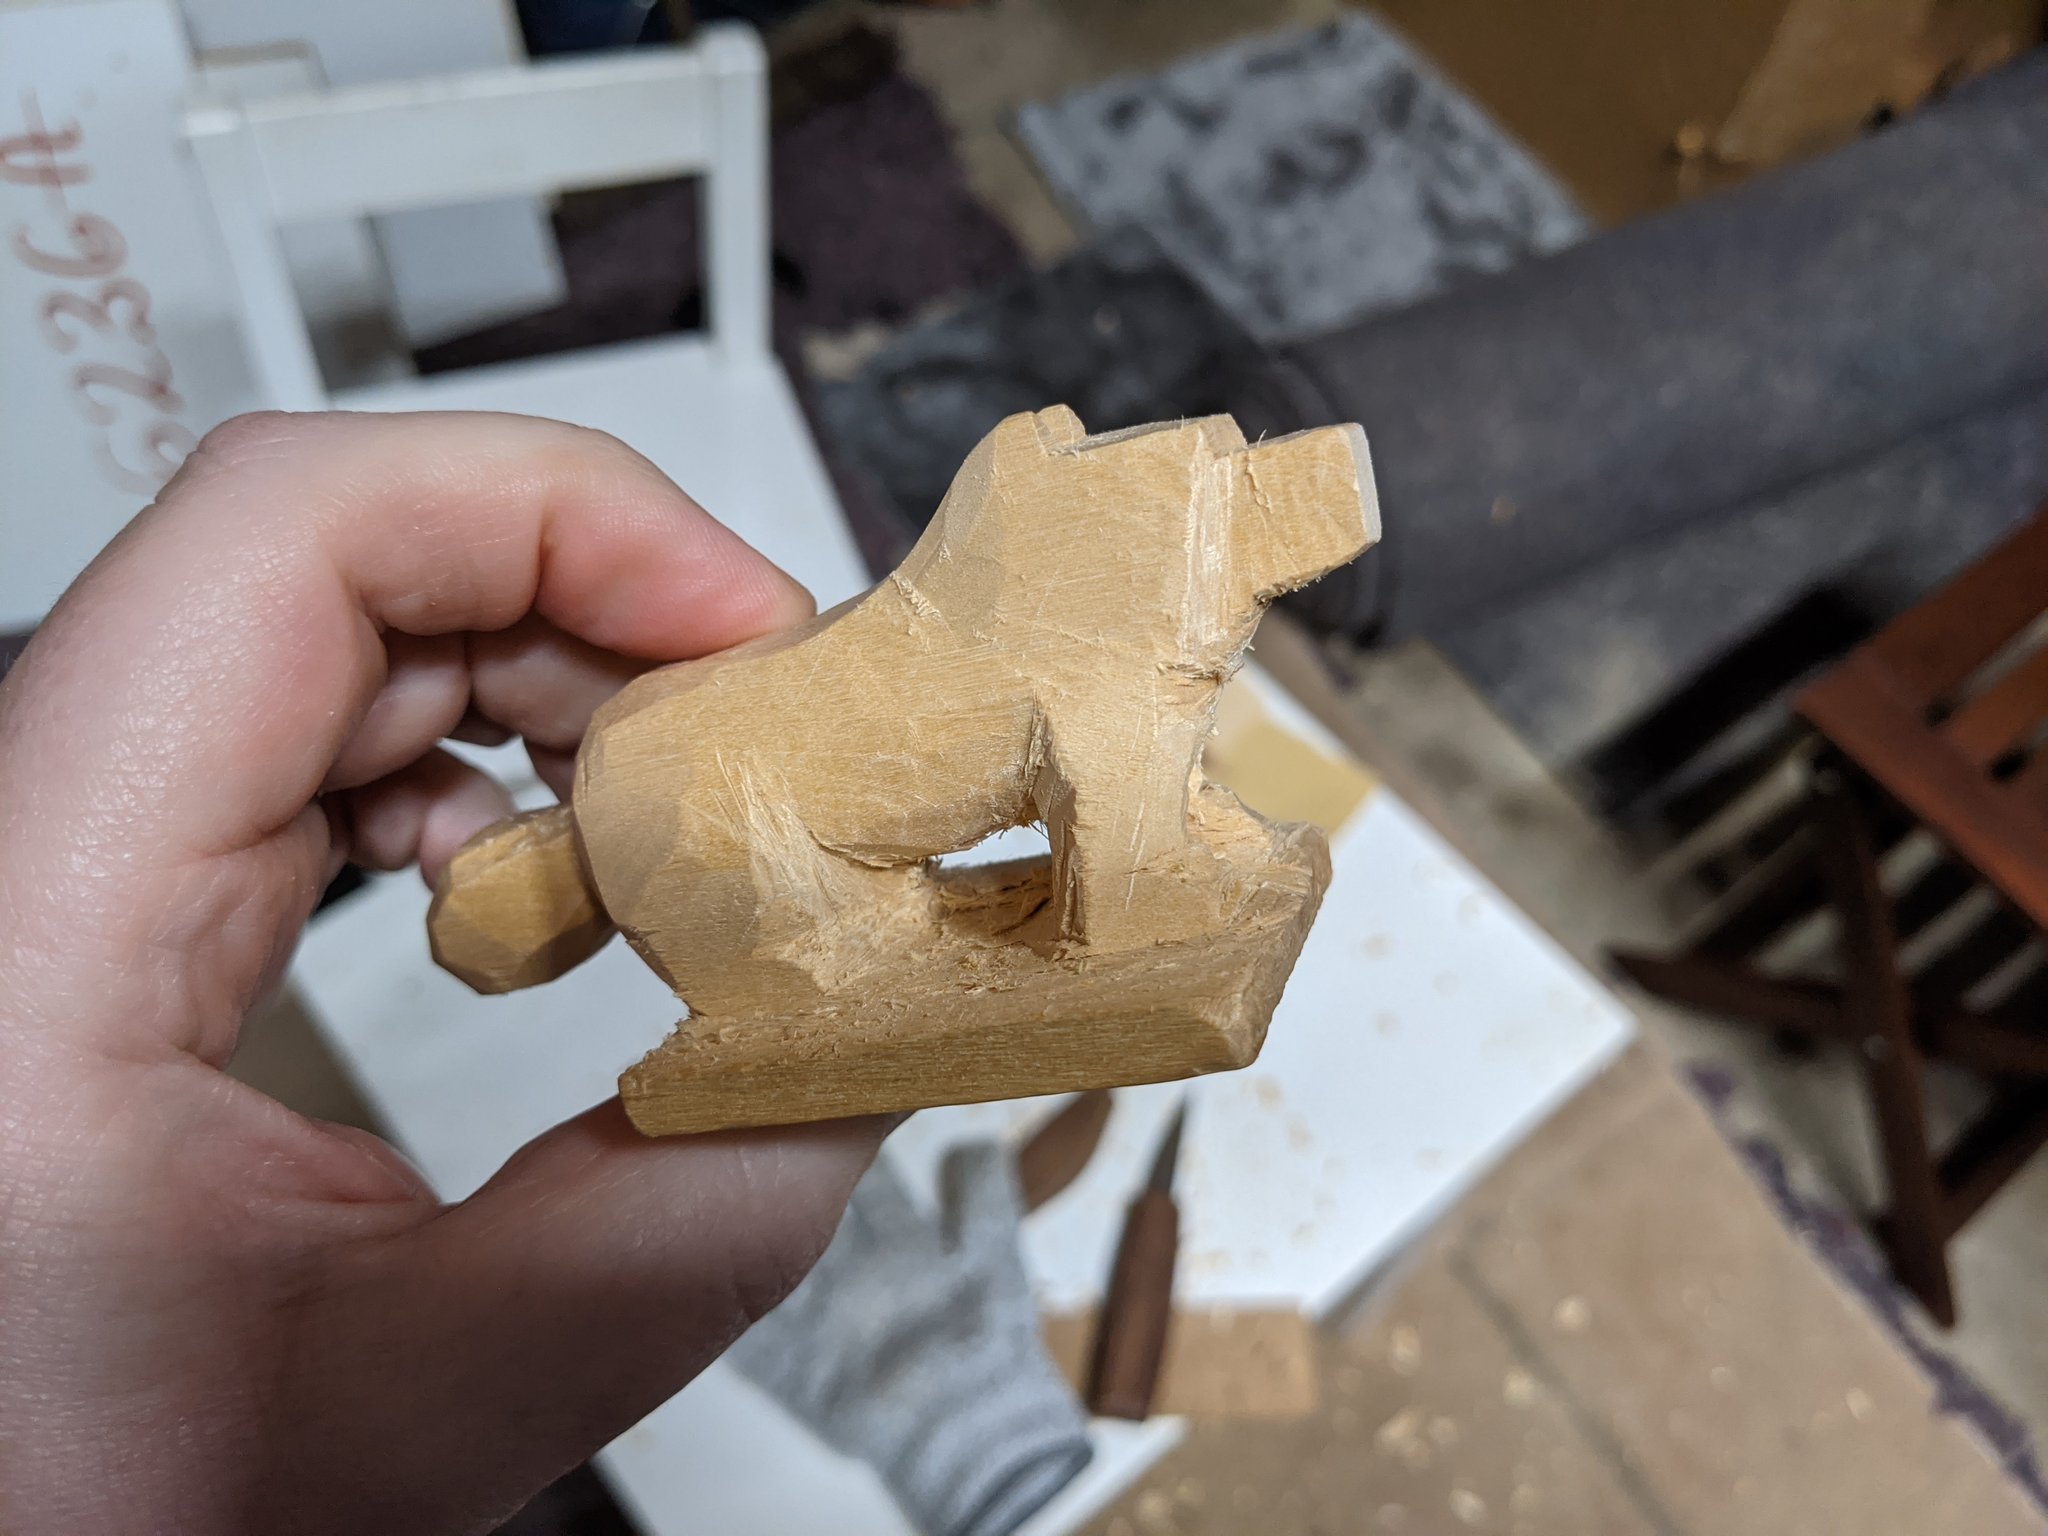 Side view of the dog, clearly standing on it's wooden platform, still rough cuts, but a clear view under the dog's belly. Though looks like you'd catch a splinter if you weren't careful